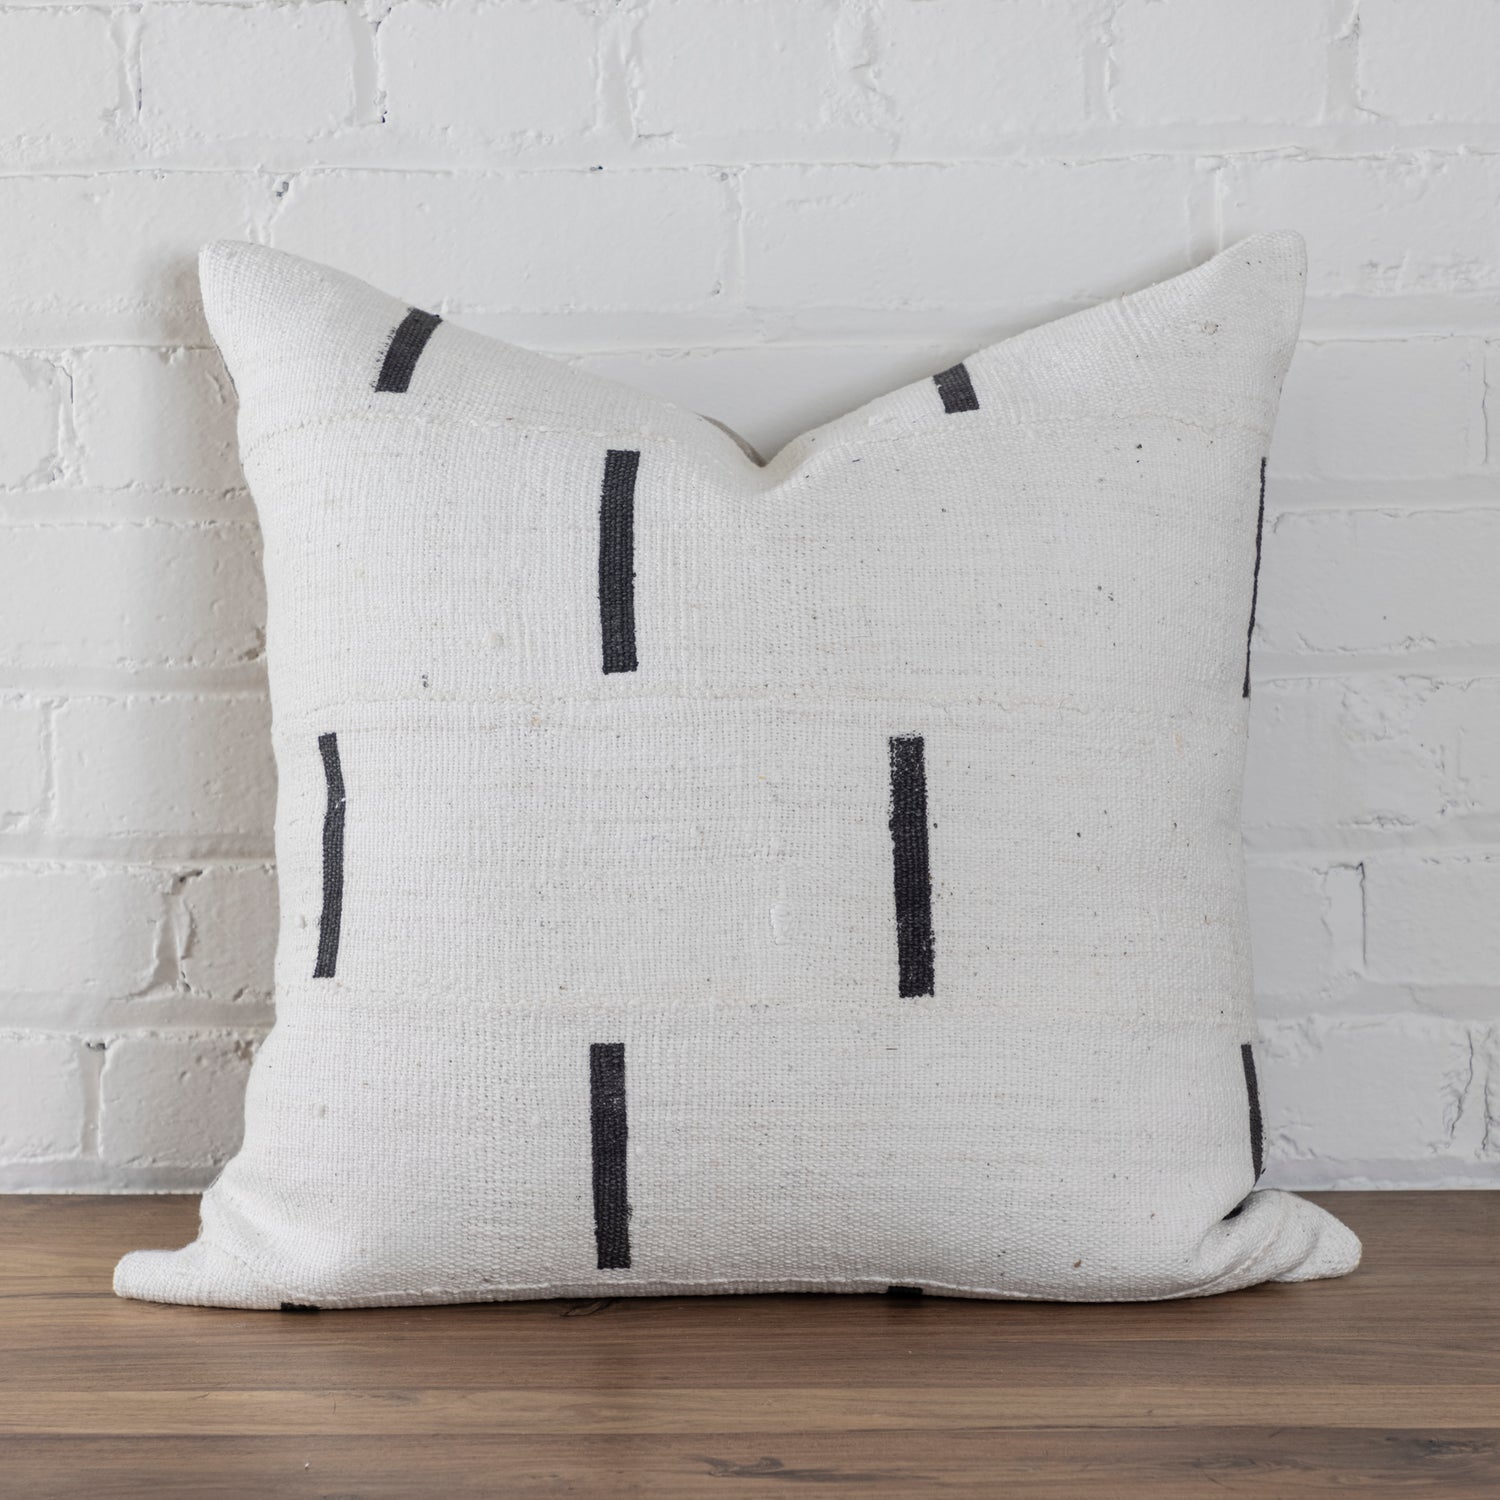 Mud Cloth Square Pillow, White with Black Dashes